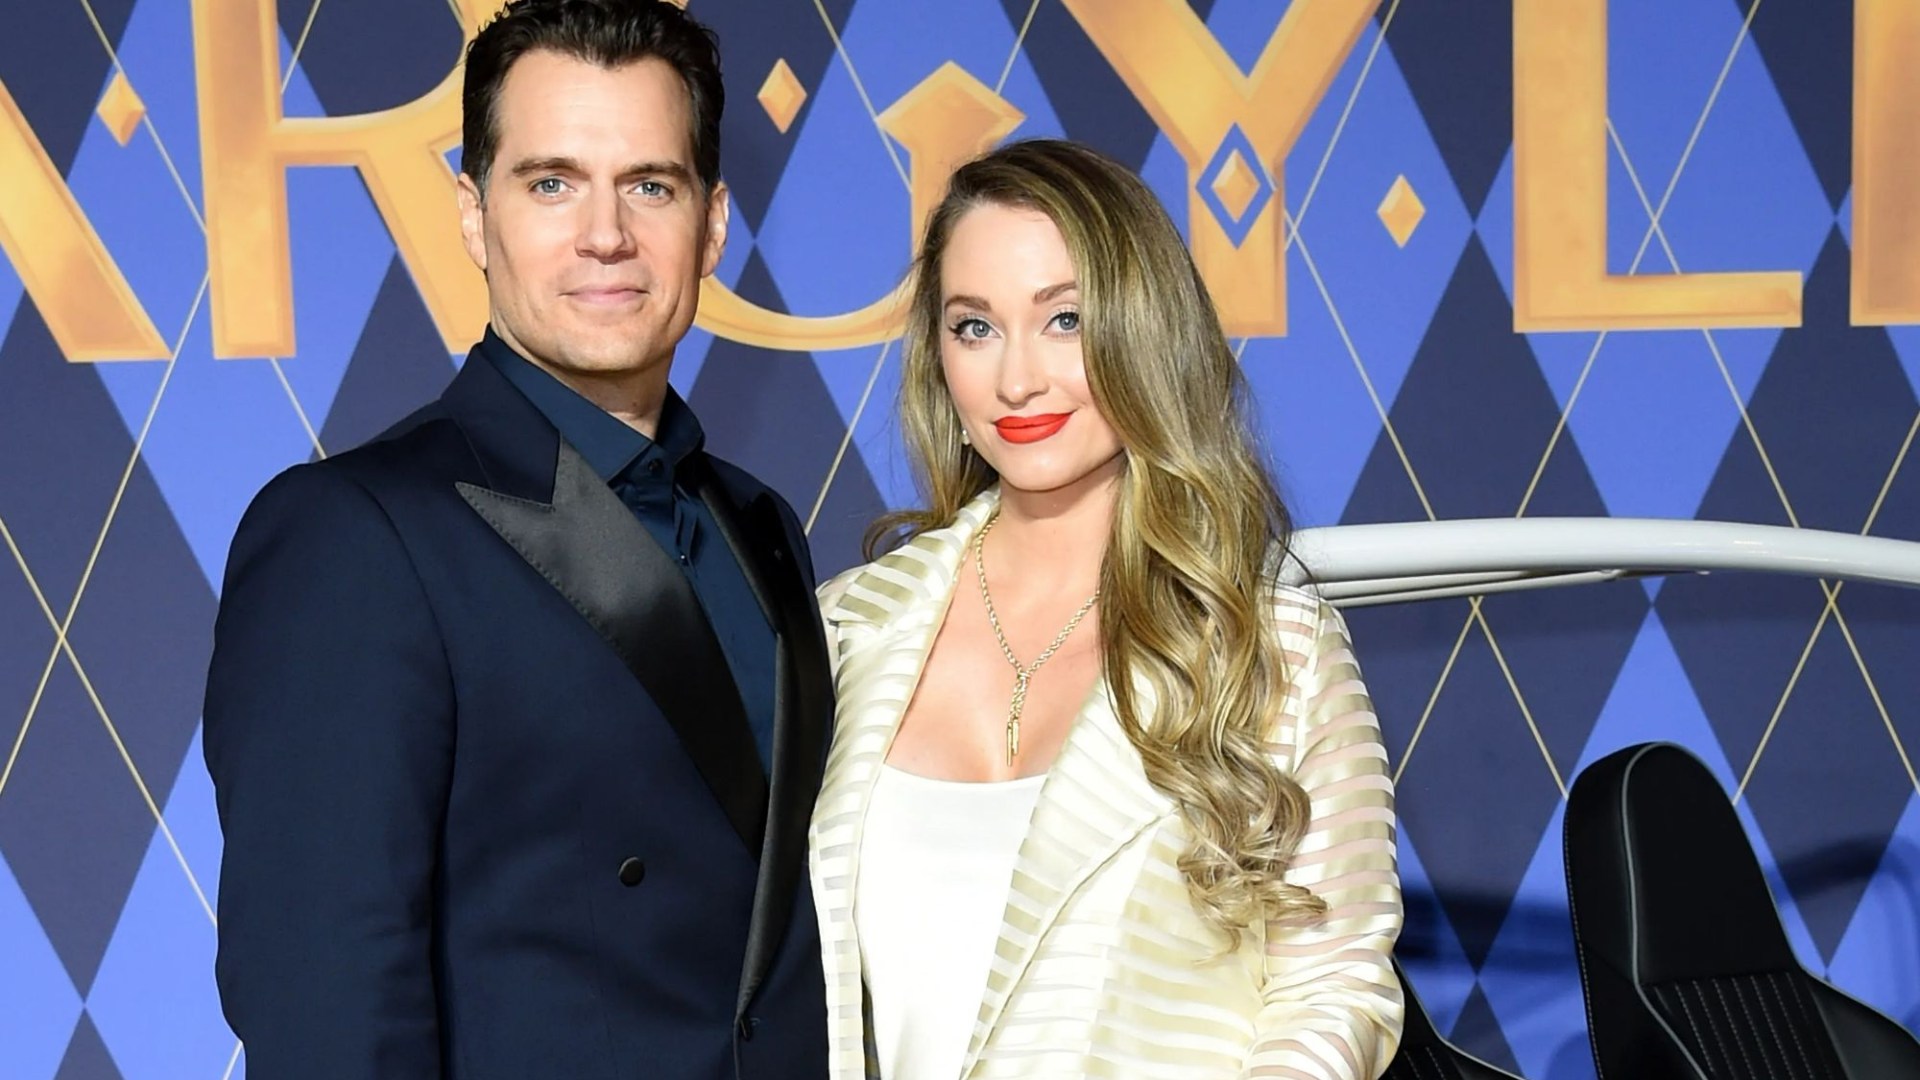 Exciting News: Henry Cavill, 40, and Natalie Viscuso, 34, Expecting Their First Baby Together!